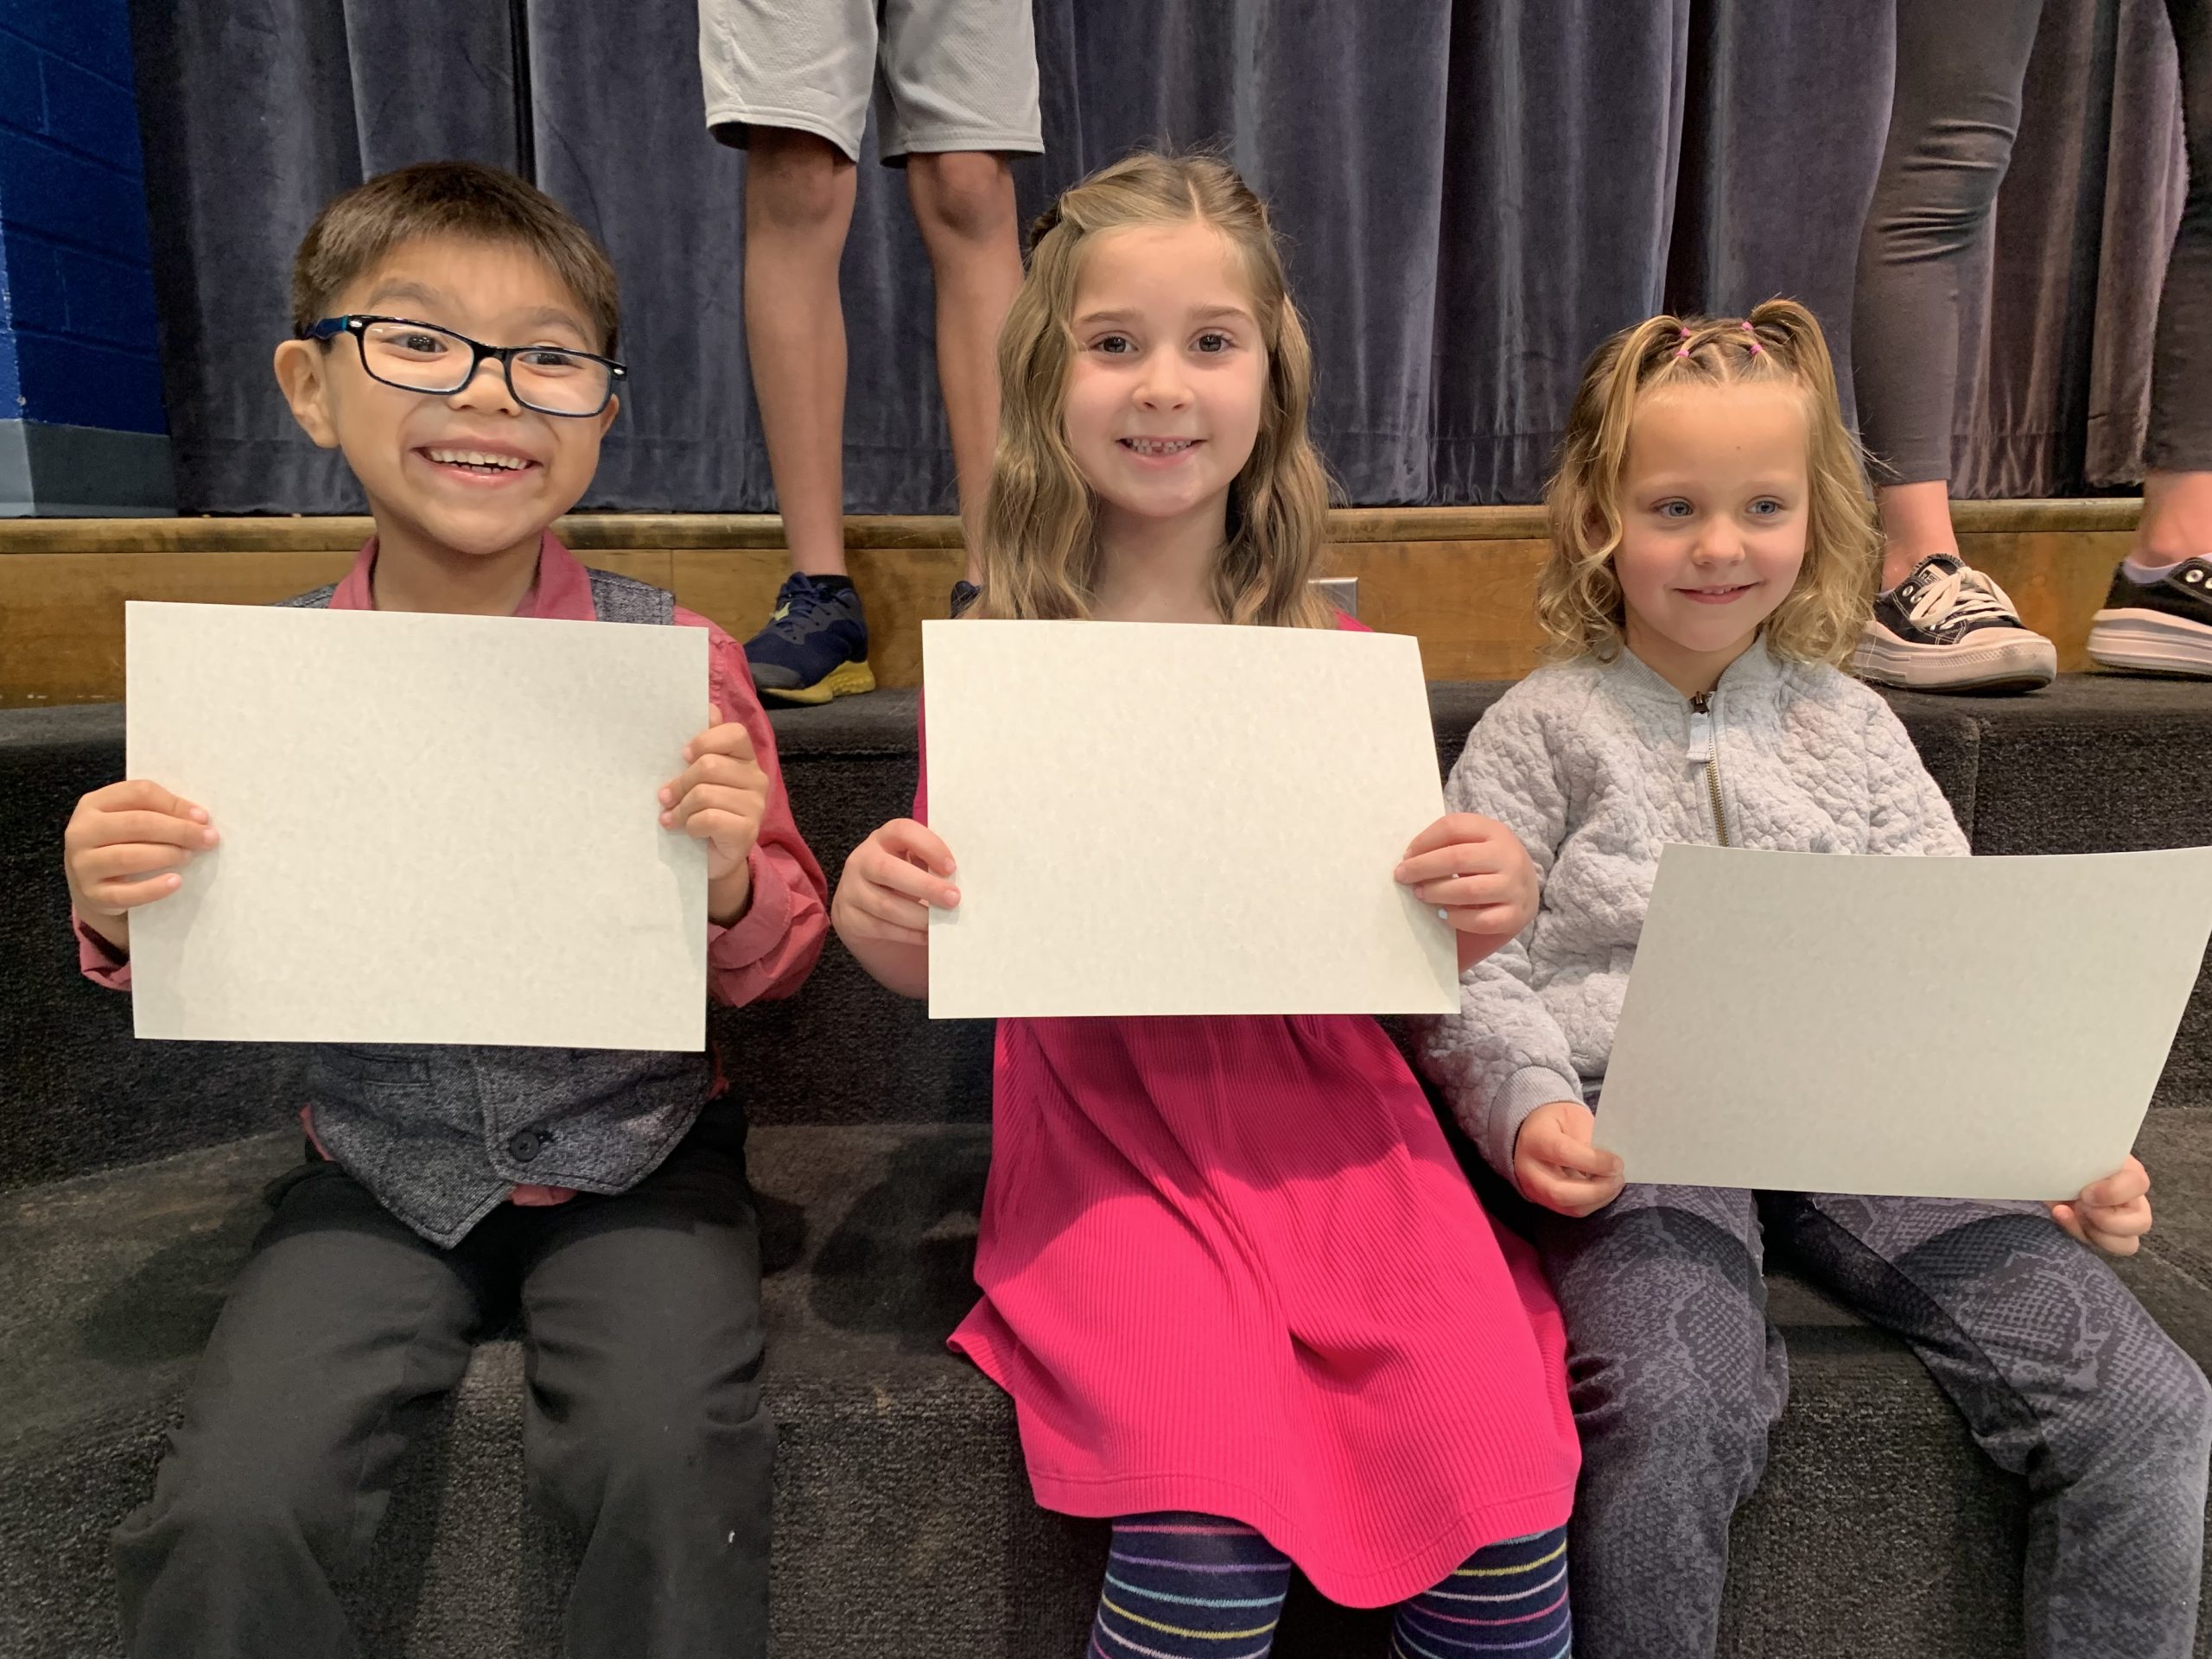 Our Kindergarten awards recipients for February